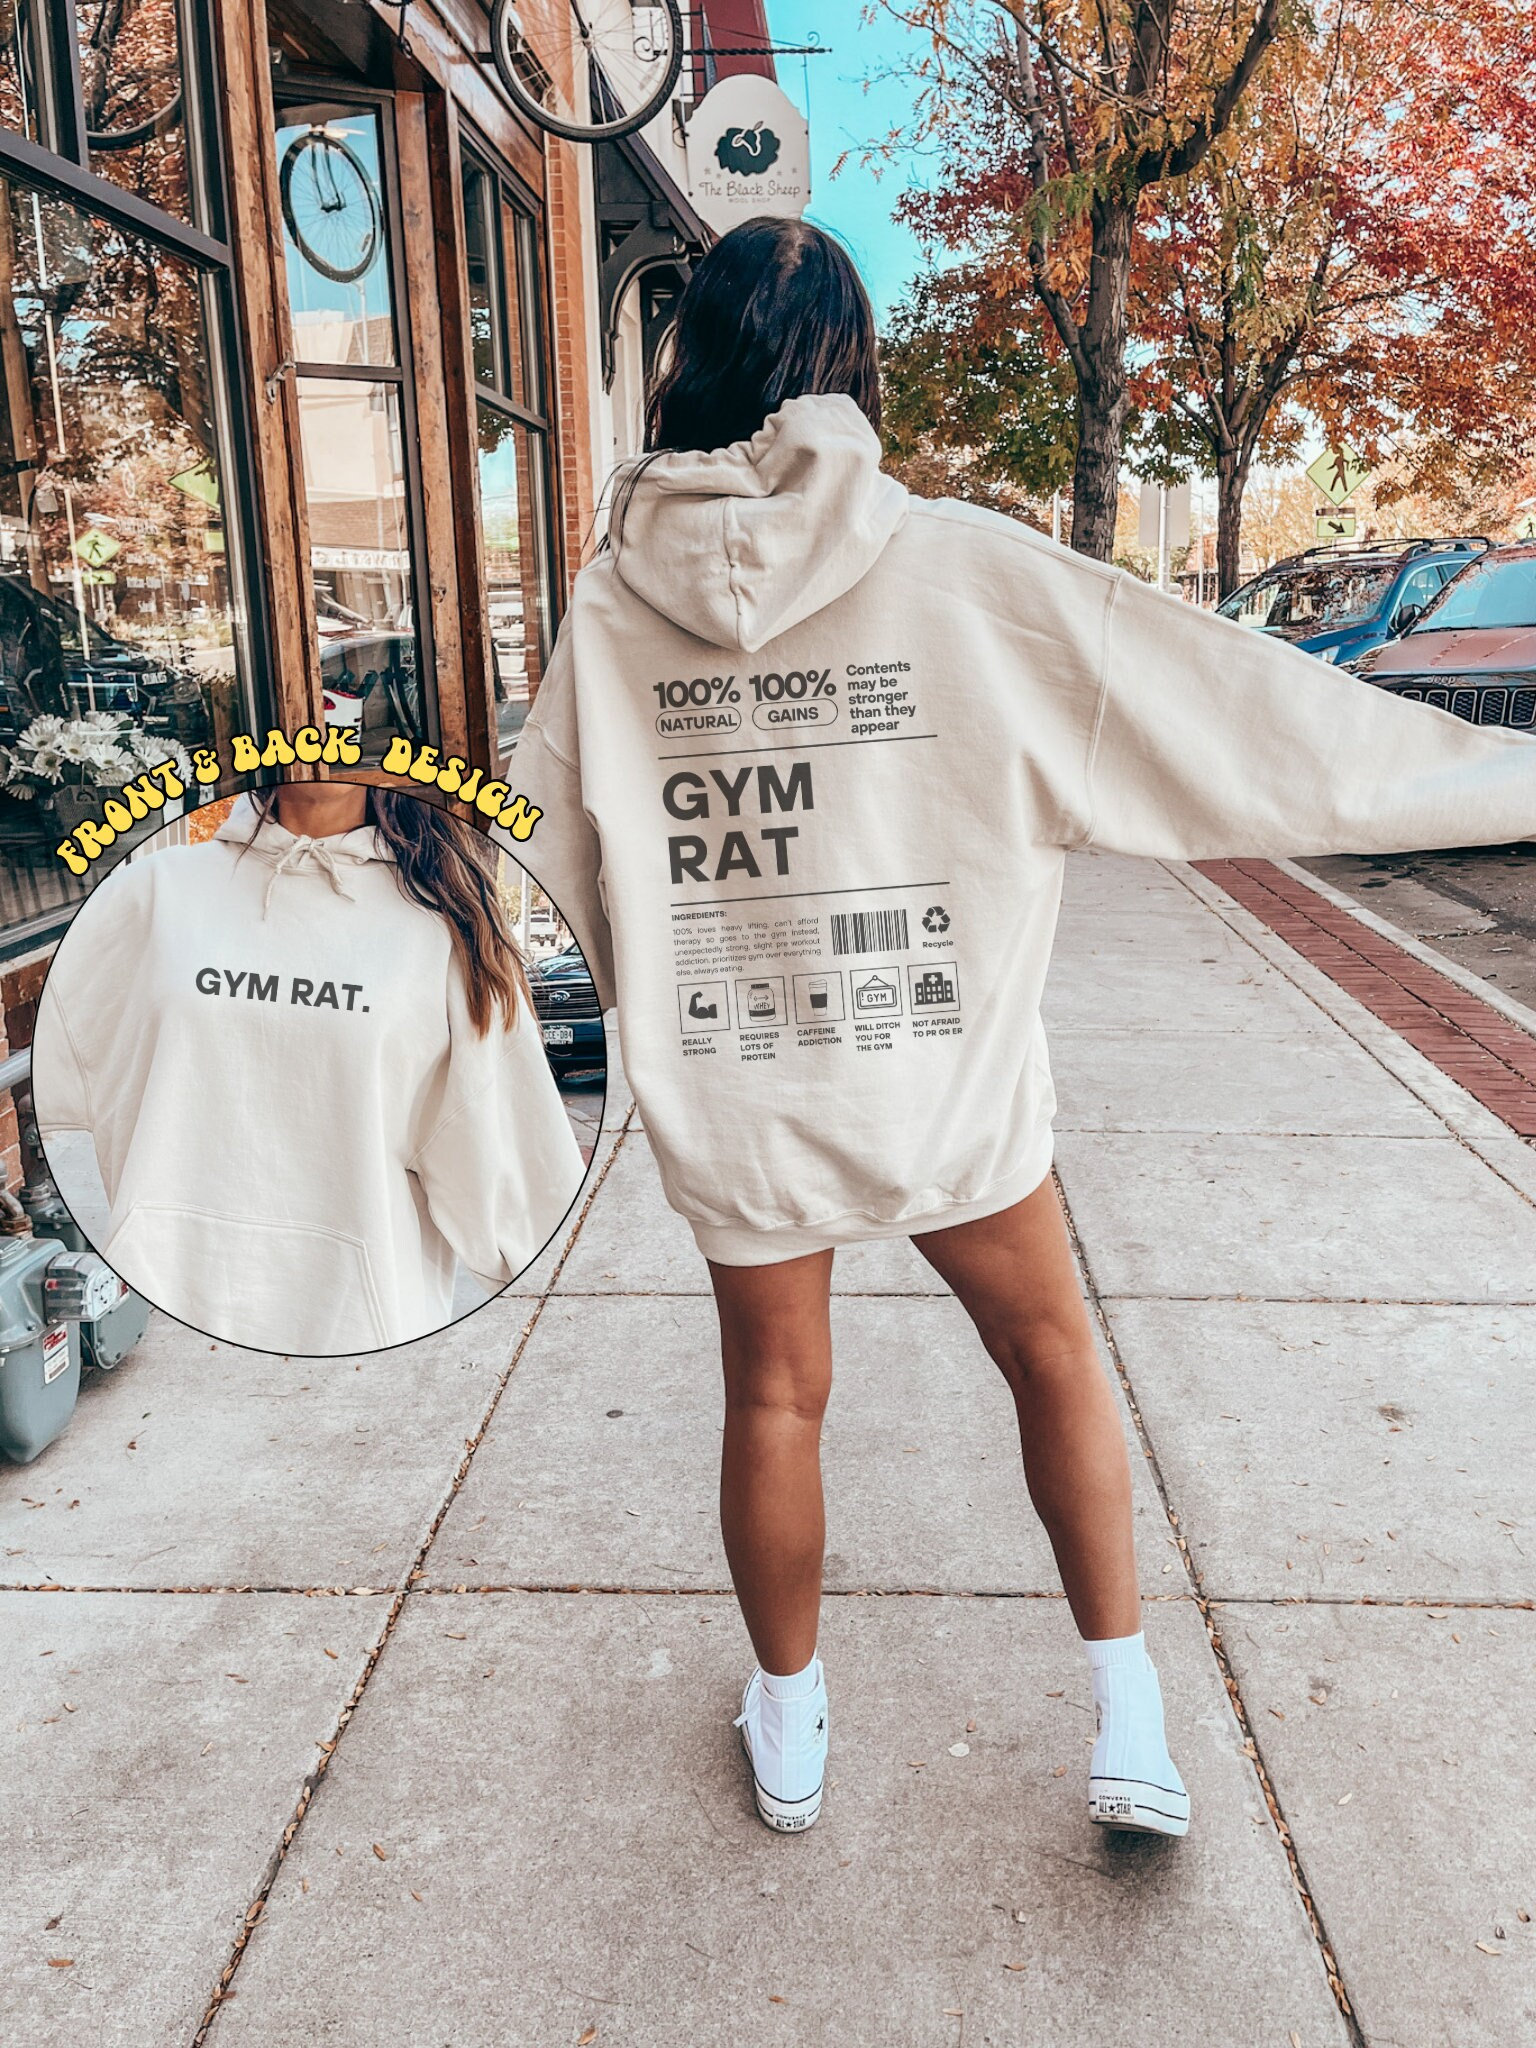 Best Gifts For Gym Rats, How To Choose A Gift For A Gym Rat